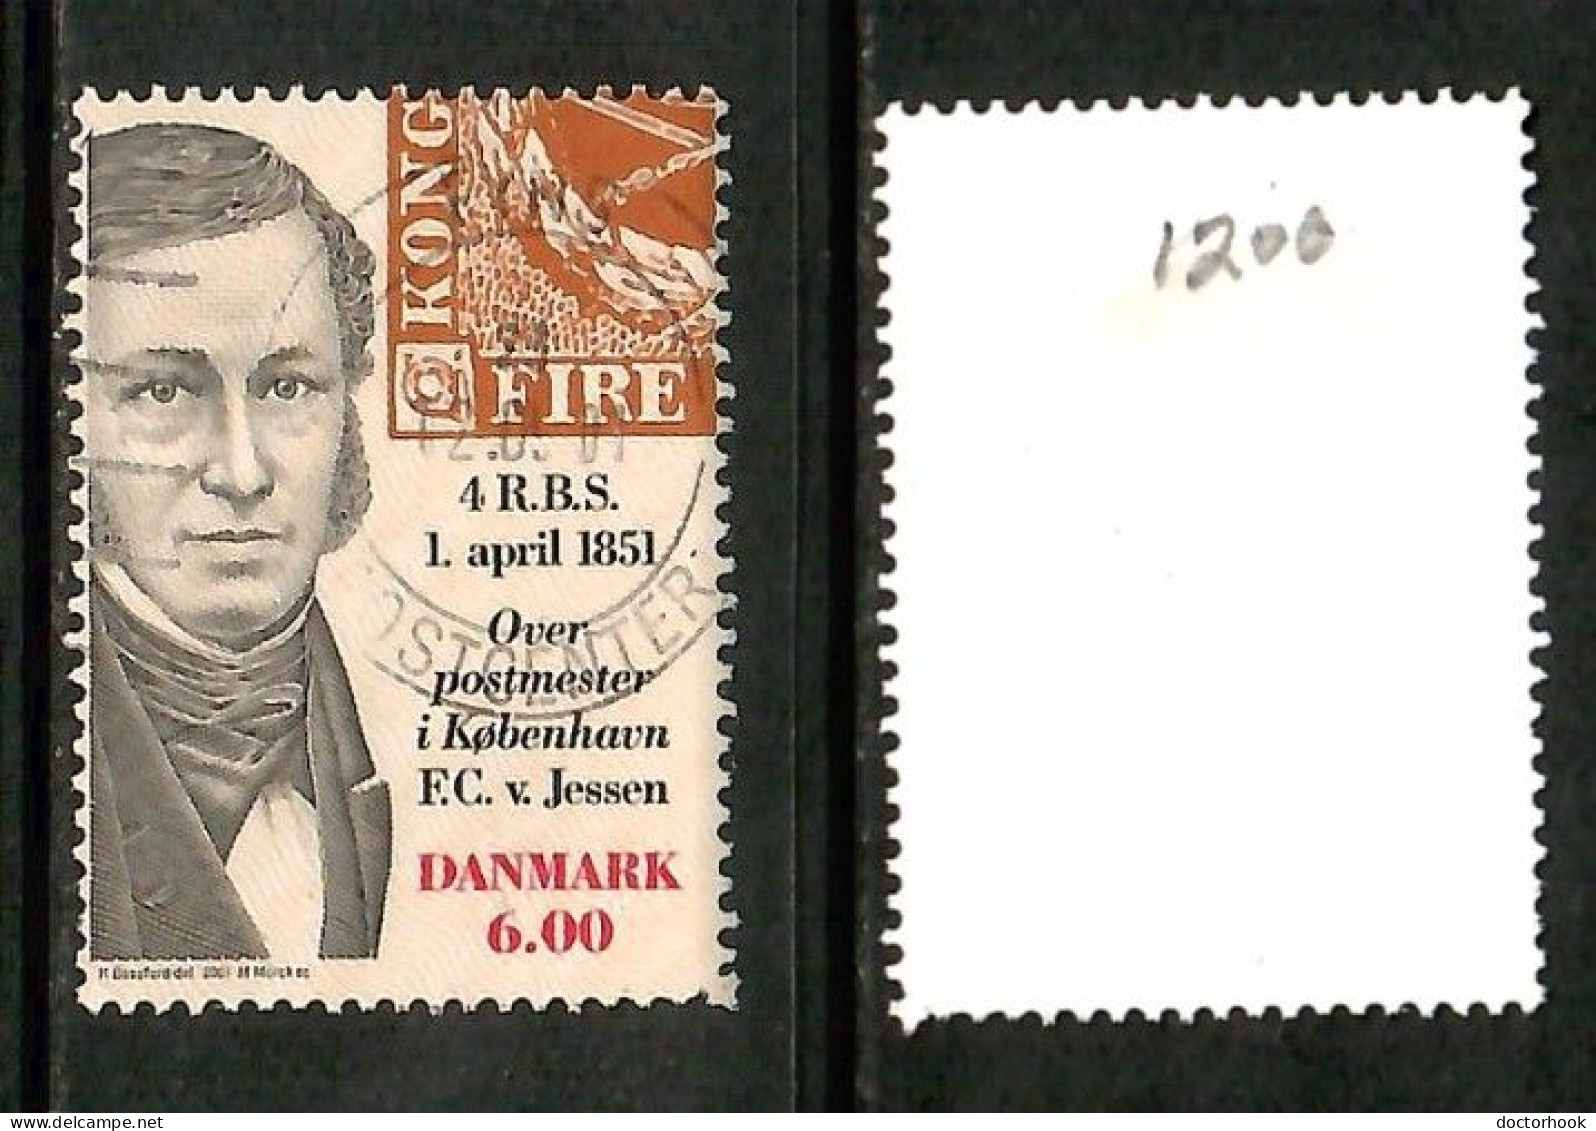 DENMARK   Scott # 1200 USED (CONDITION PER SCAN) (Stamp Scan # 1025-4) - Used Stamps